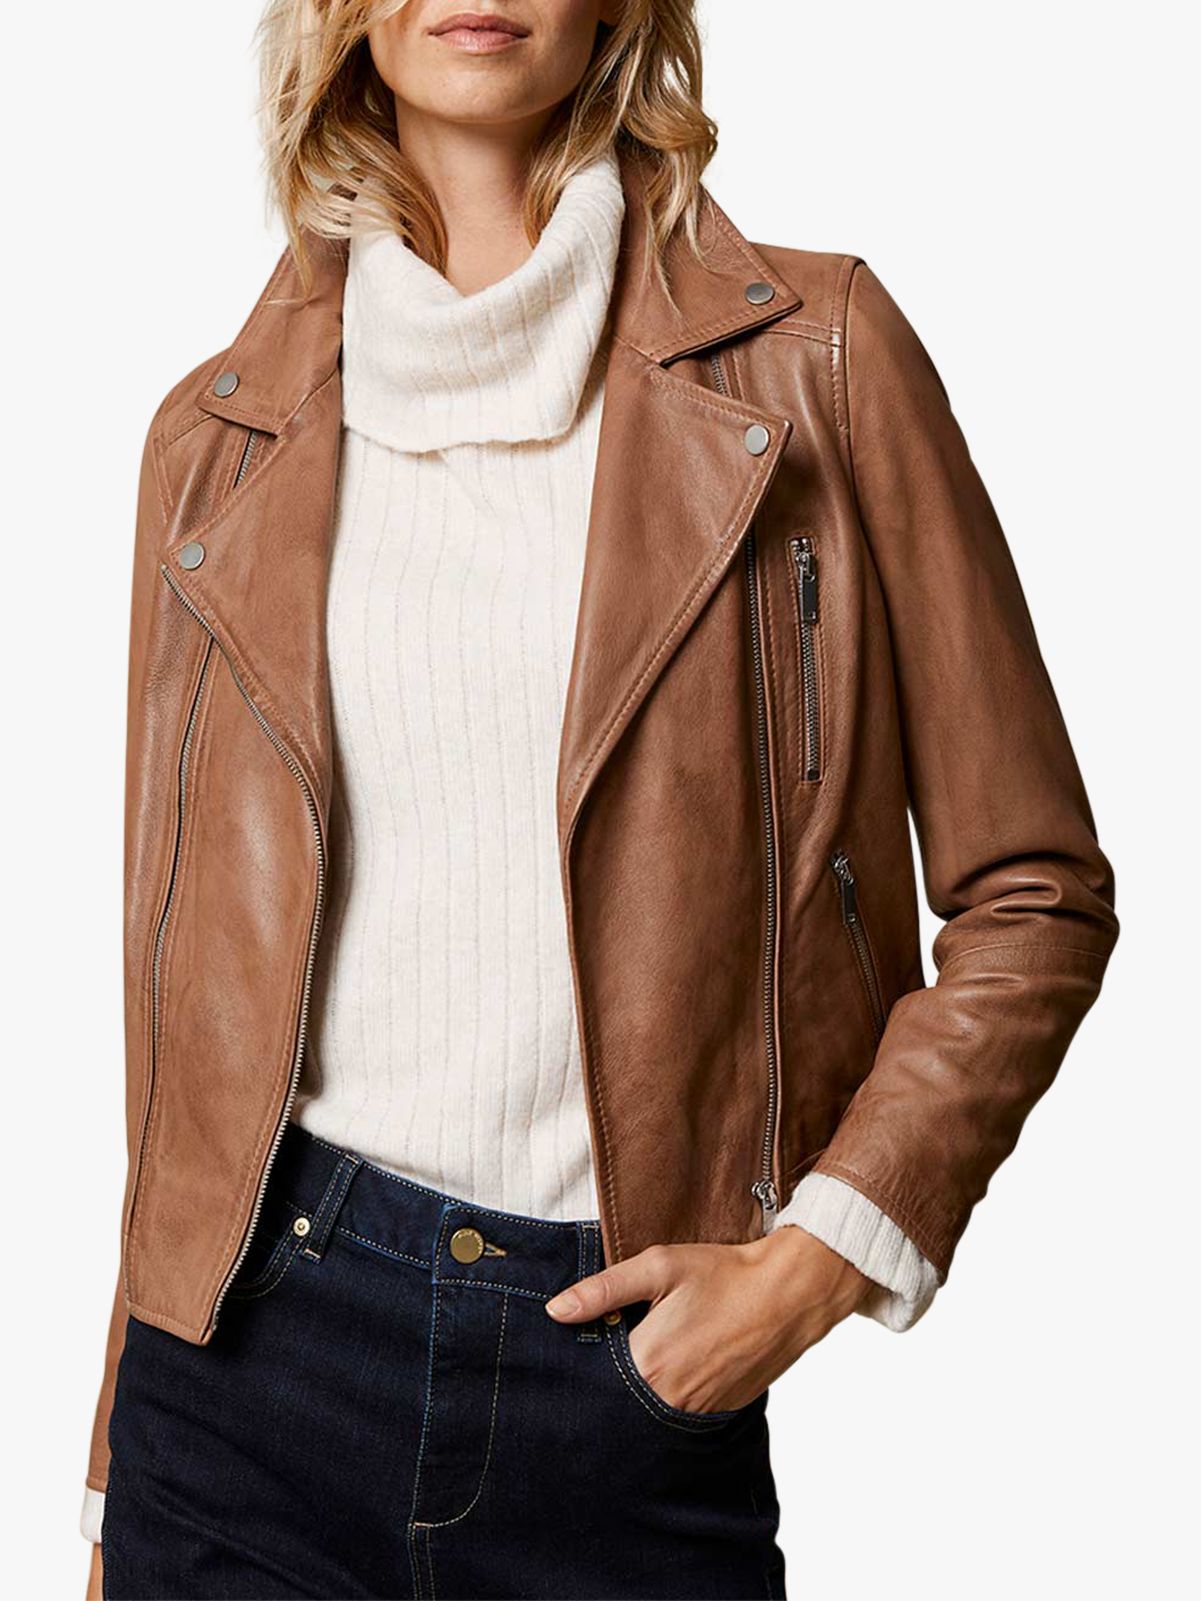 A Classic Biker Jacket: Levi's Faux Leather Moto Jacket Coat Season Is Upon  Us — Get Ready With These 16 Picks From Nordstrom Rack POPSUGAR Fashion  Photo 15 